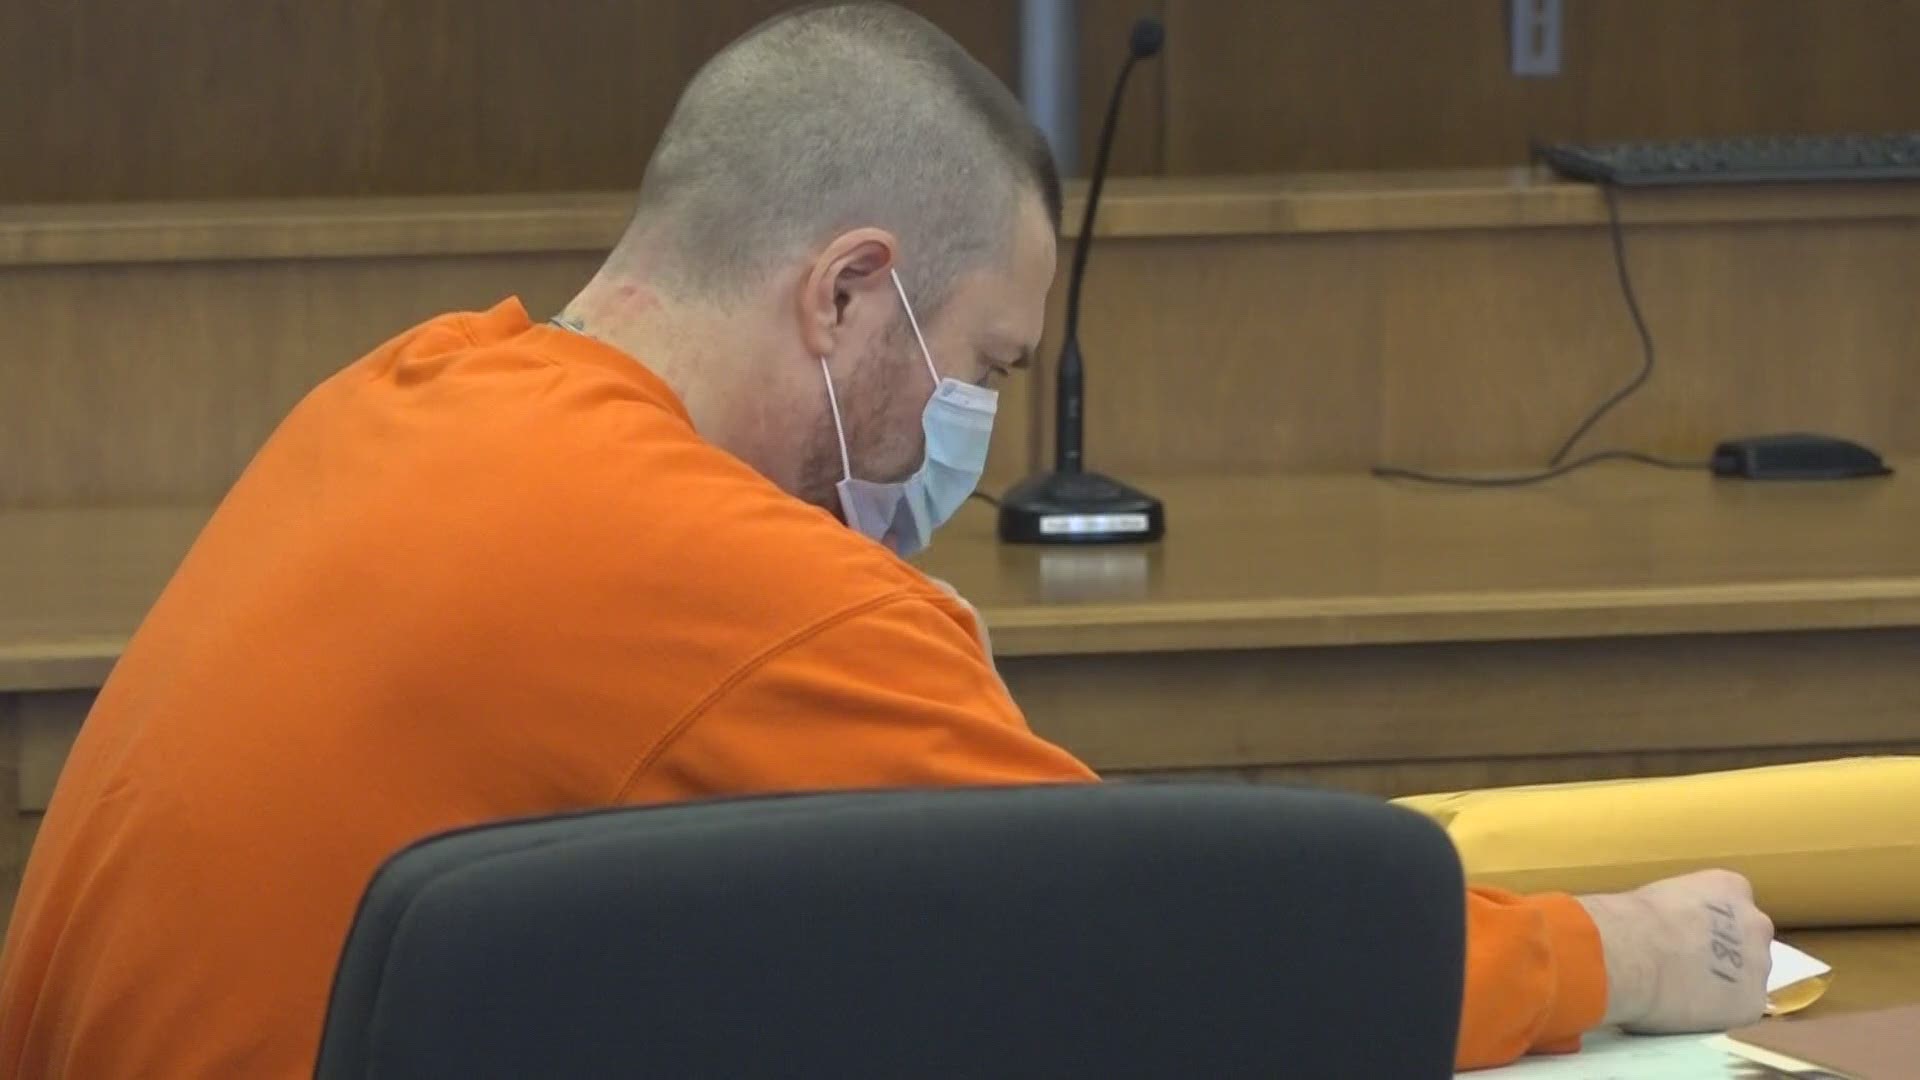 The man accused of killing his father's cat with a frying pan went on trial Tuesday.